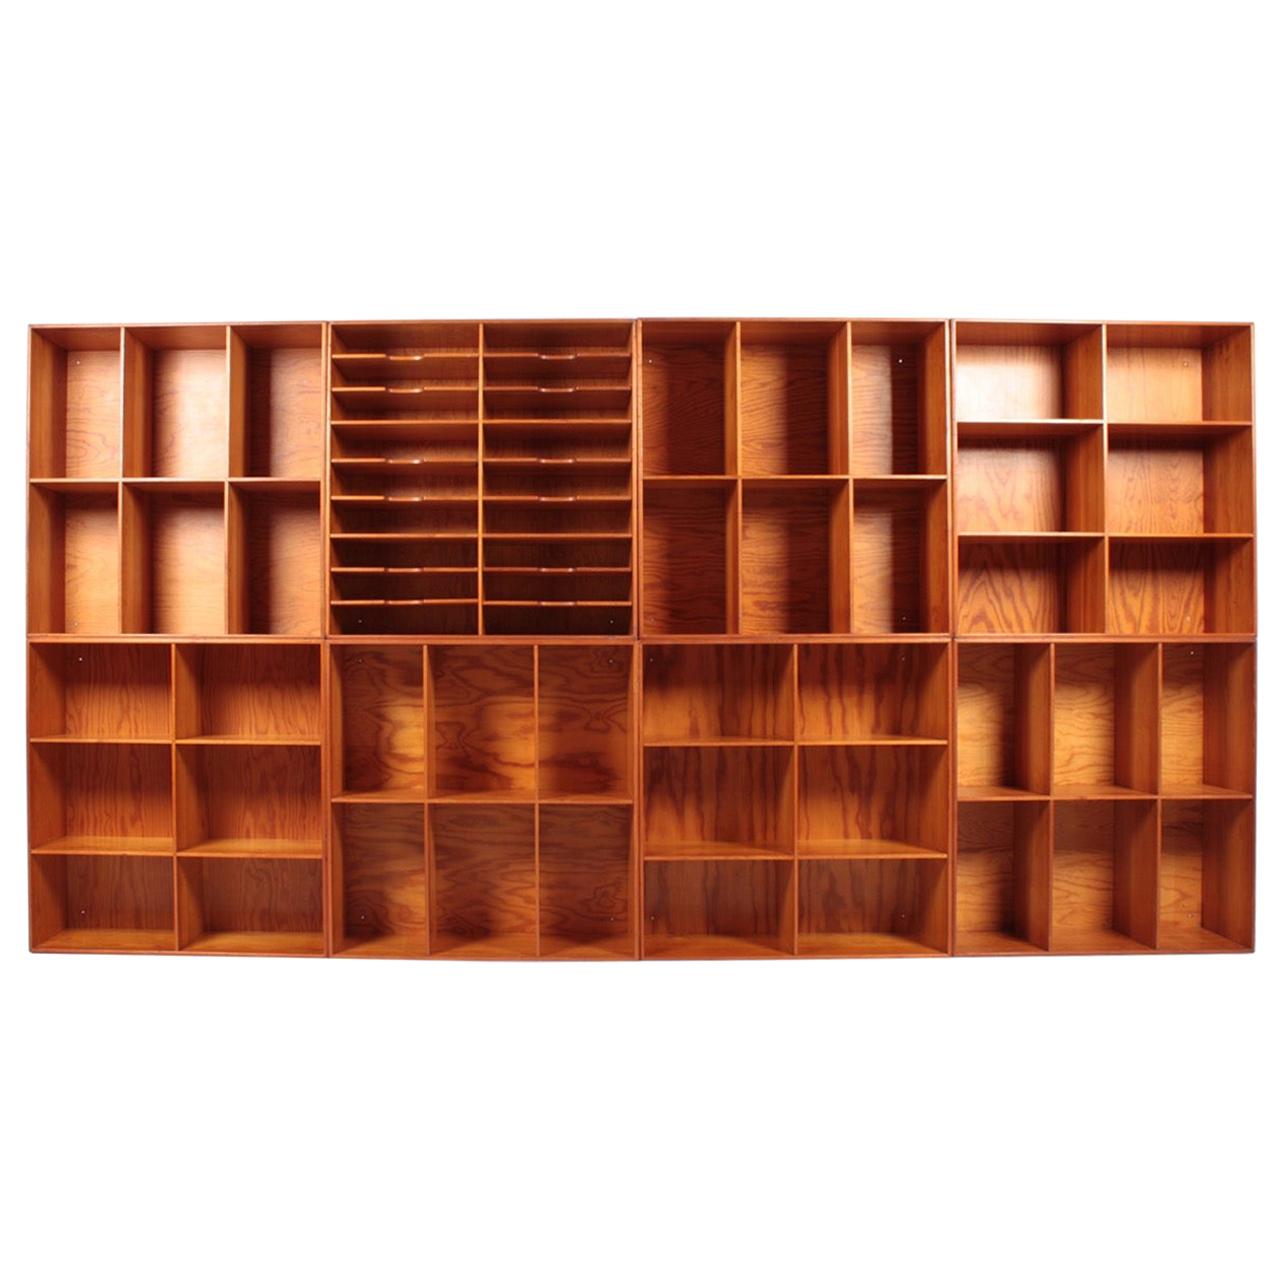 Set of Eight Bookcases in Pine by Mogens Koch, Danish Design, Midcentury, 1950s